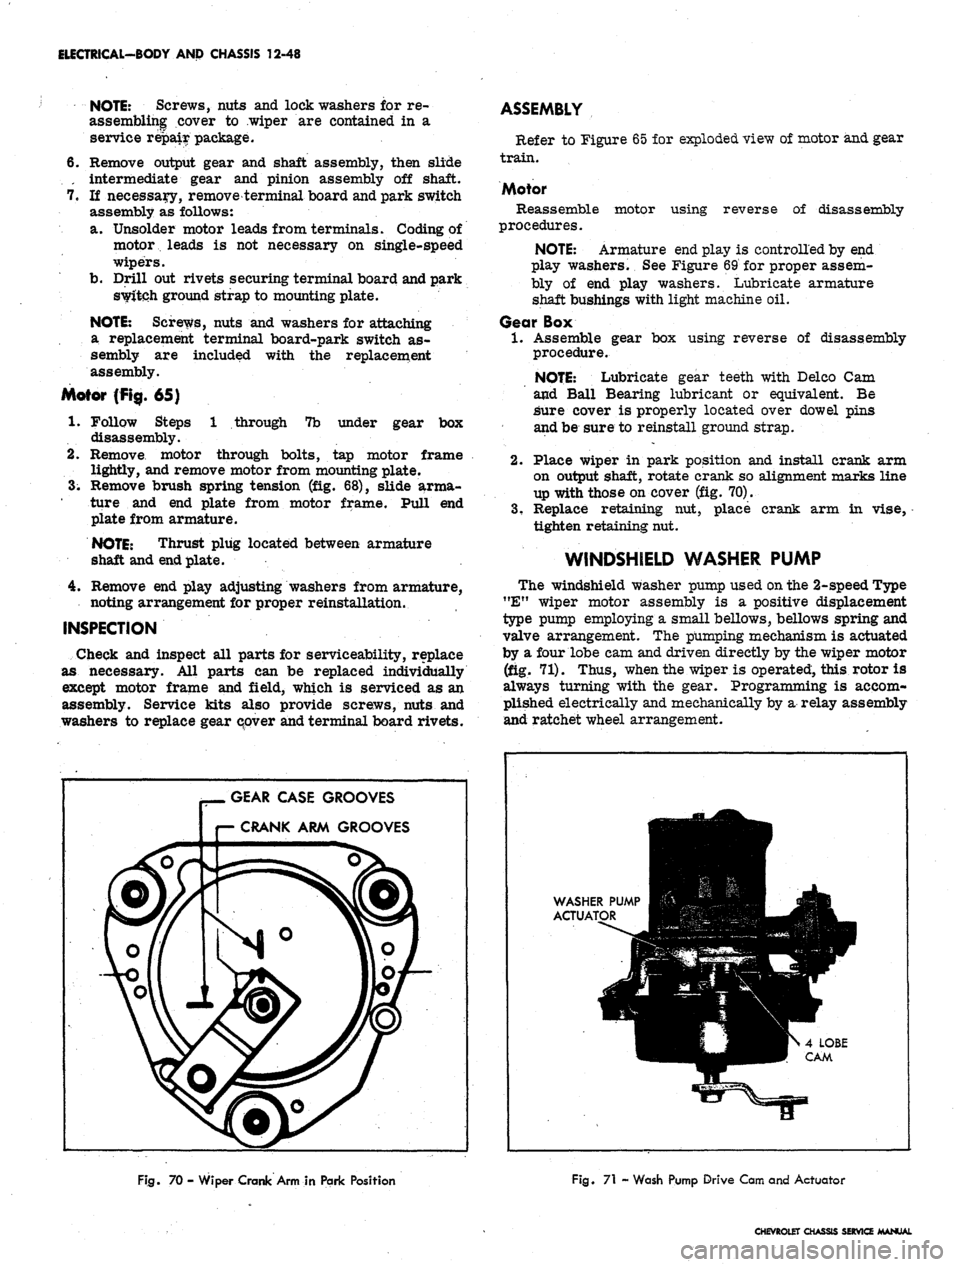 CHEVROLET CAMARO 1967 1.G Chassis Owners Manual 
ELECTRICAL-BODY
 AND CHASSIS 12-48

NOTE:
 Screws, nuts and lock washers for re-

assembling cover to wiper are contained in a

service repair package.

6. Remove output gear and shaft assembly, then